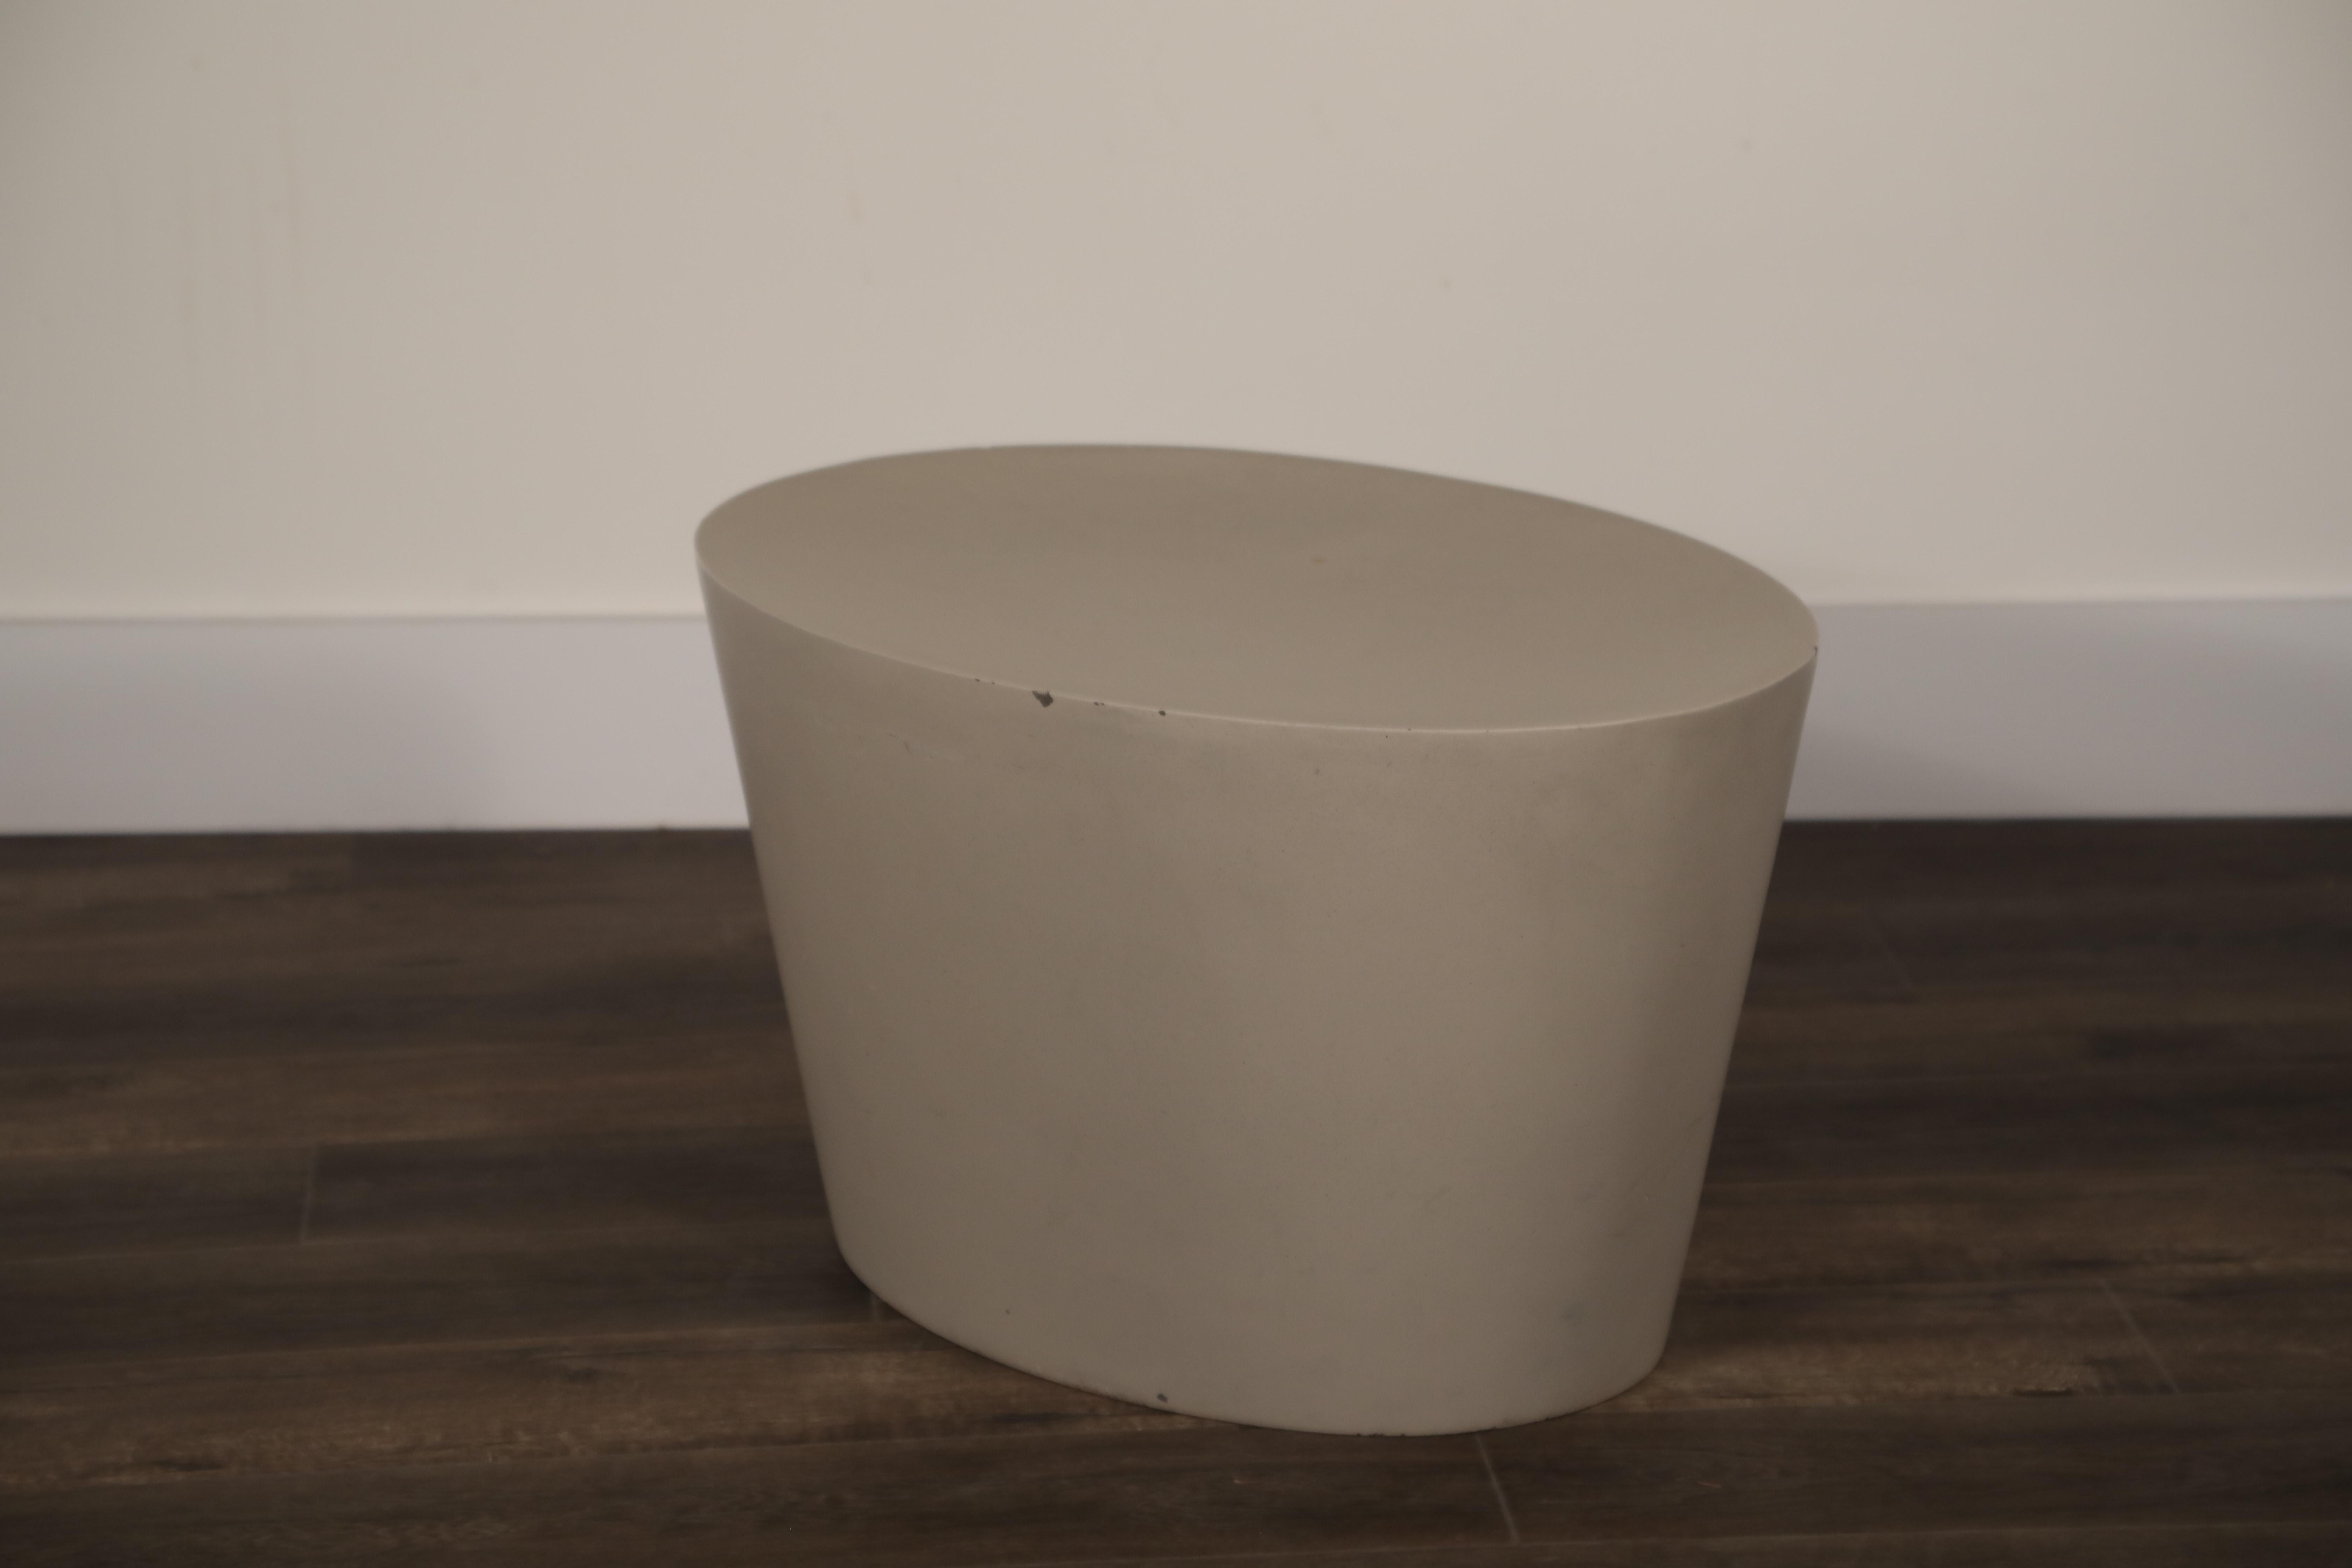 Maya Lin 1st-Generation Concrete Stool for Knoll Studio, Signed and Stamped 1998 8